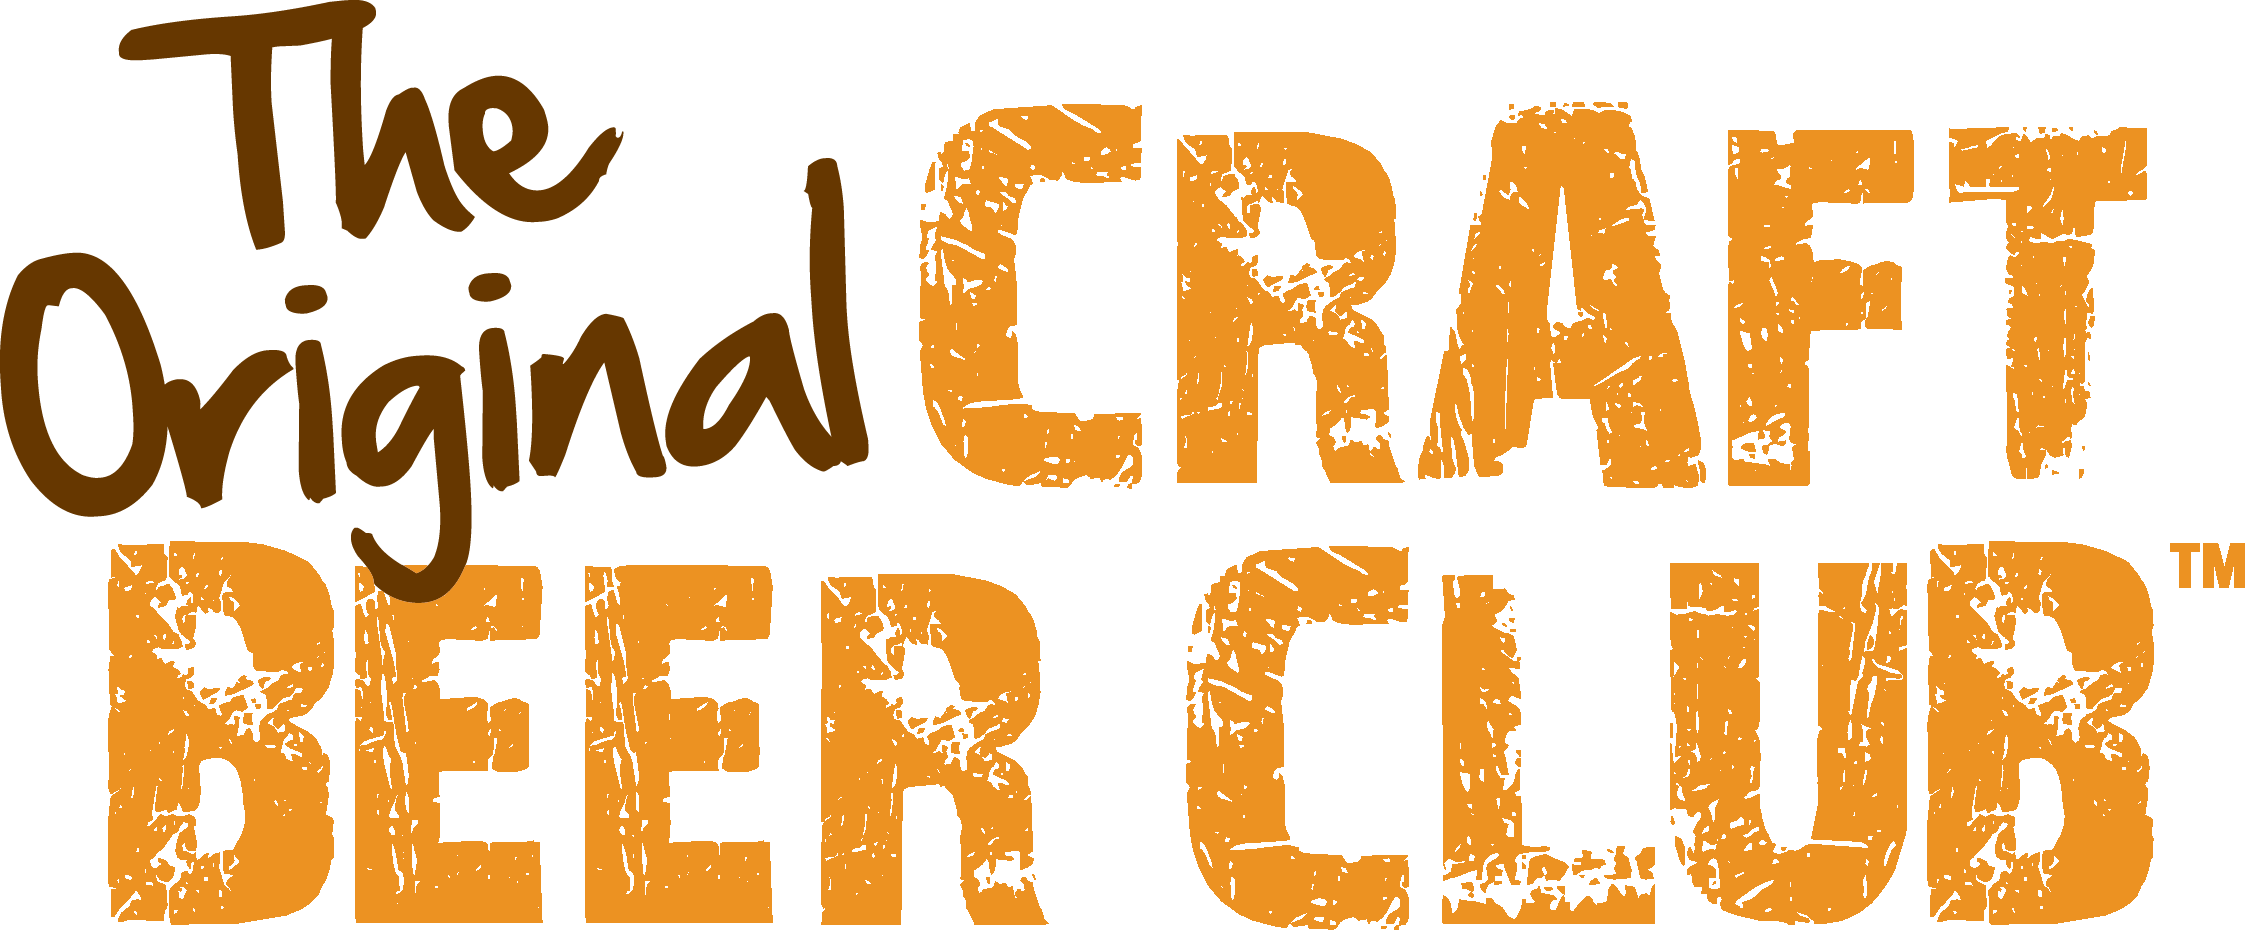 Create And Craft Discounts Codes Sales Amp Cashback - Craft Beer Of The Month Club (2245x930)